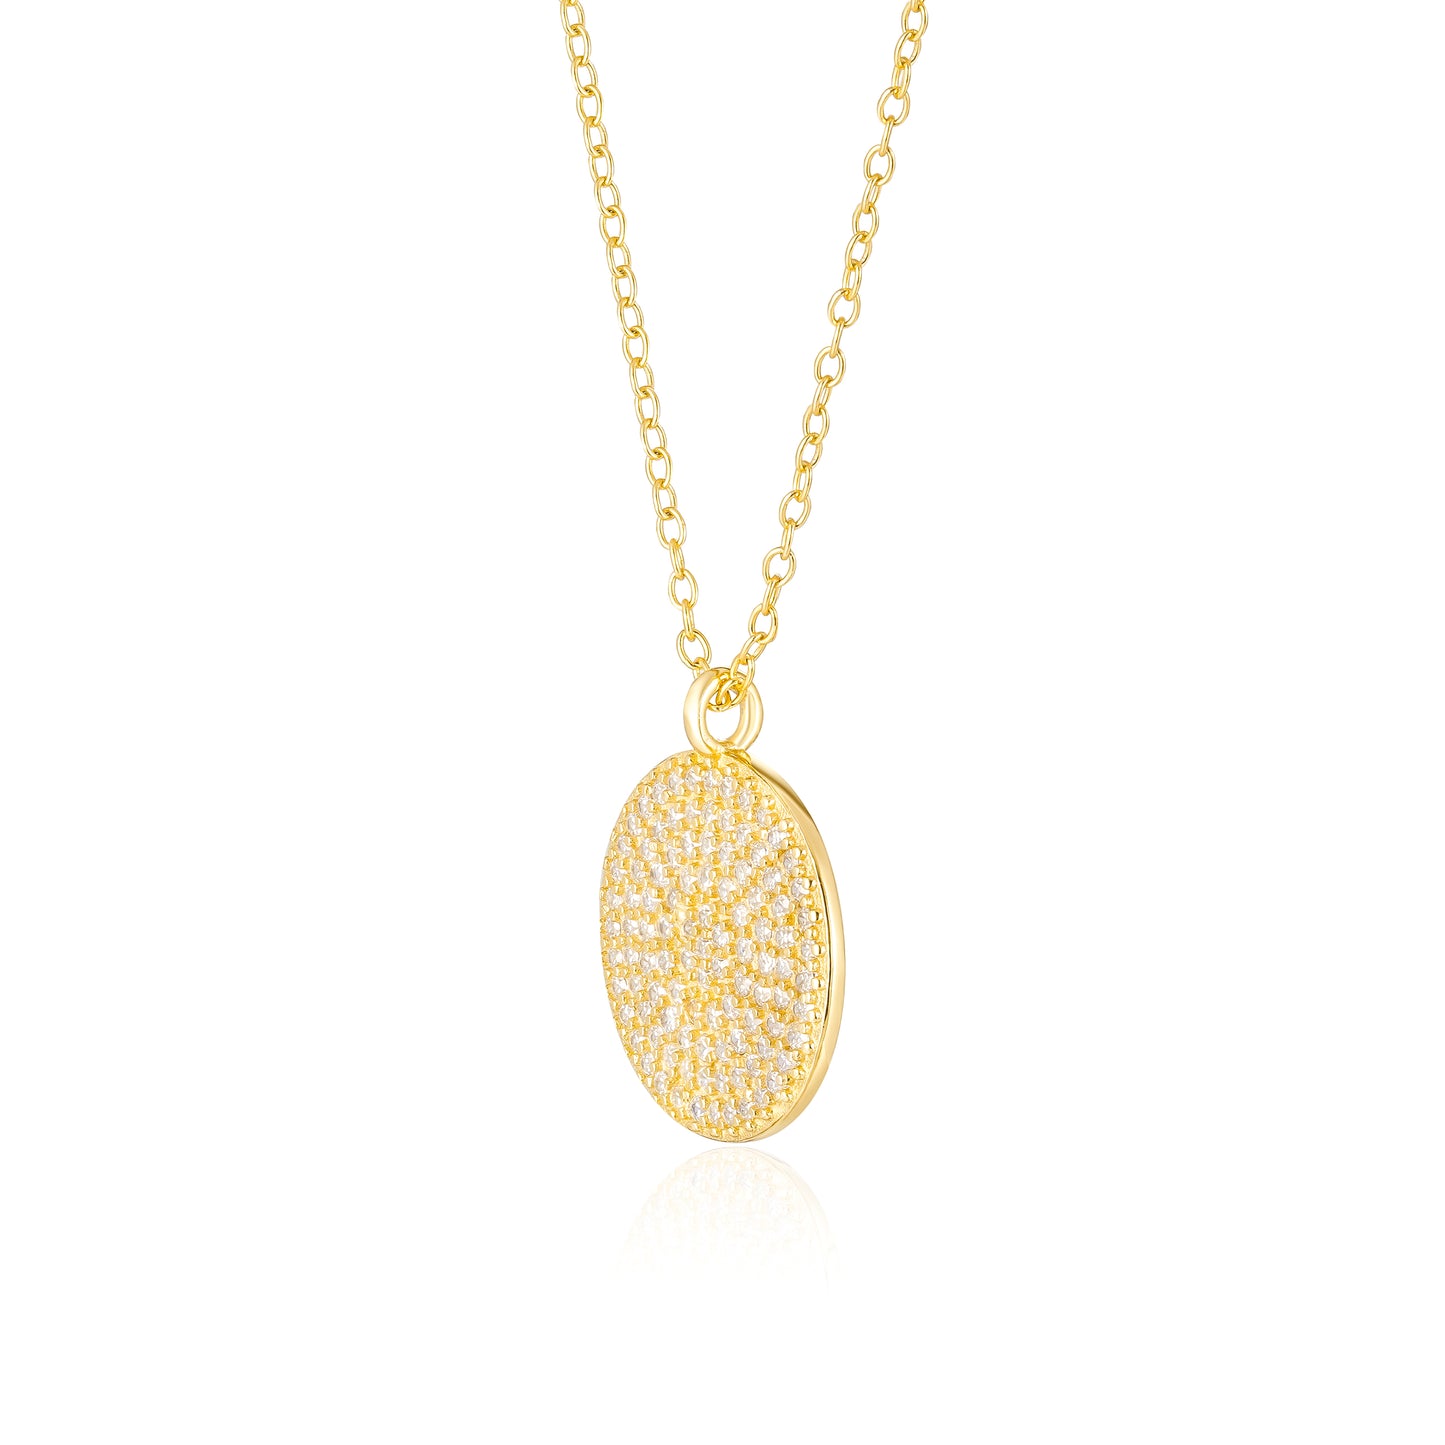 Sun Pendant - gold plated sterling silver - 18" ECO Chain Necklace